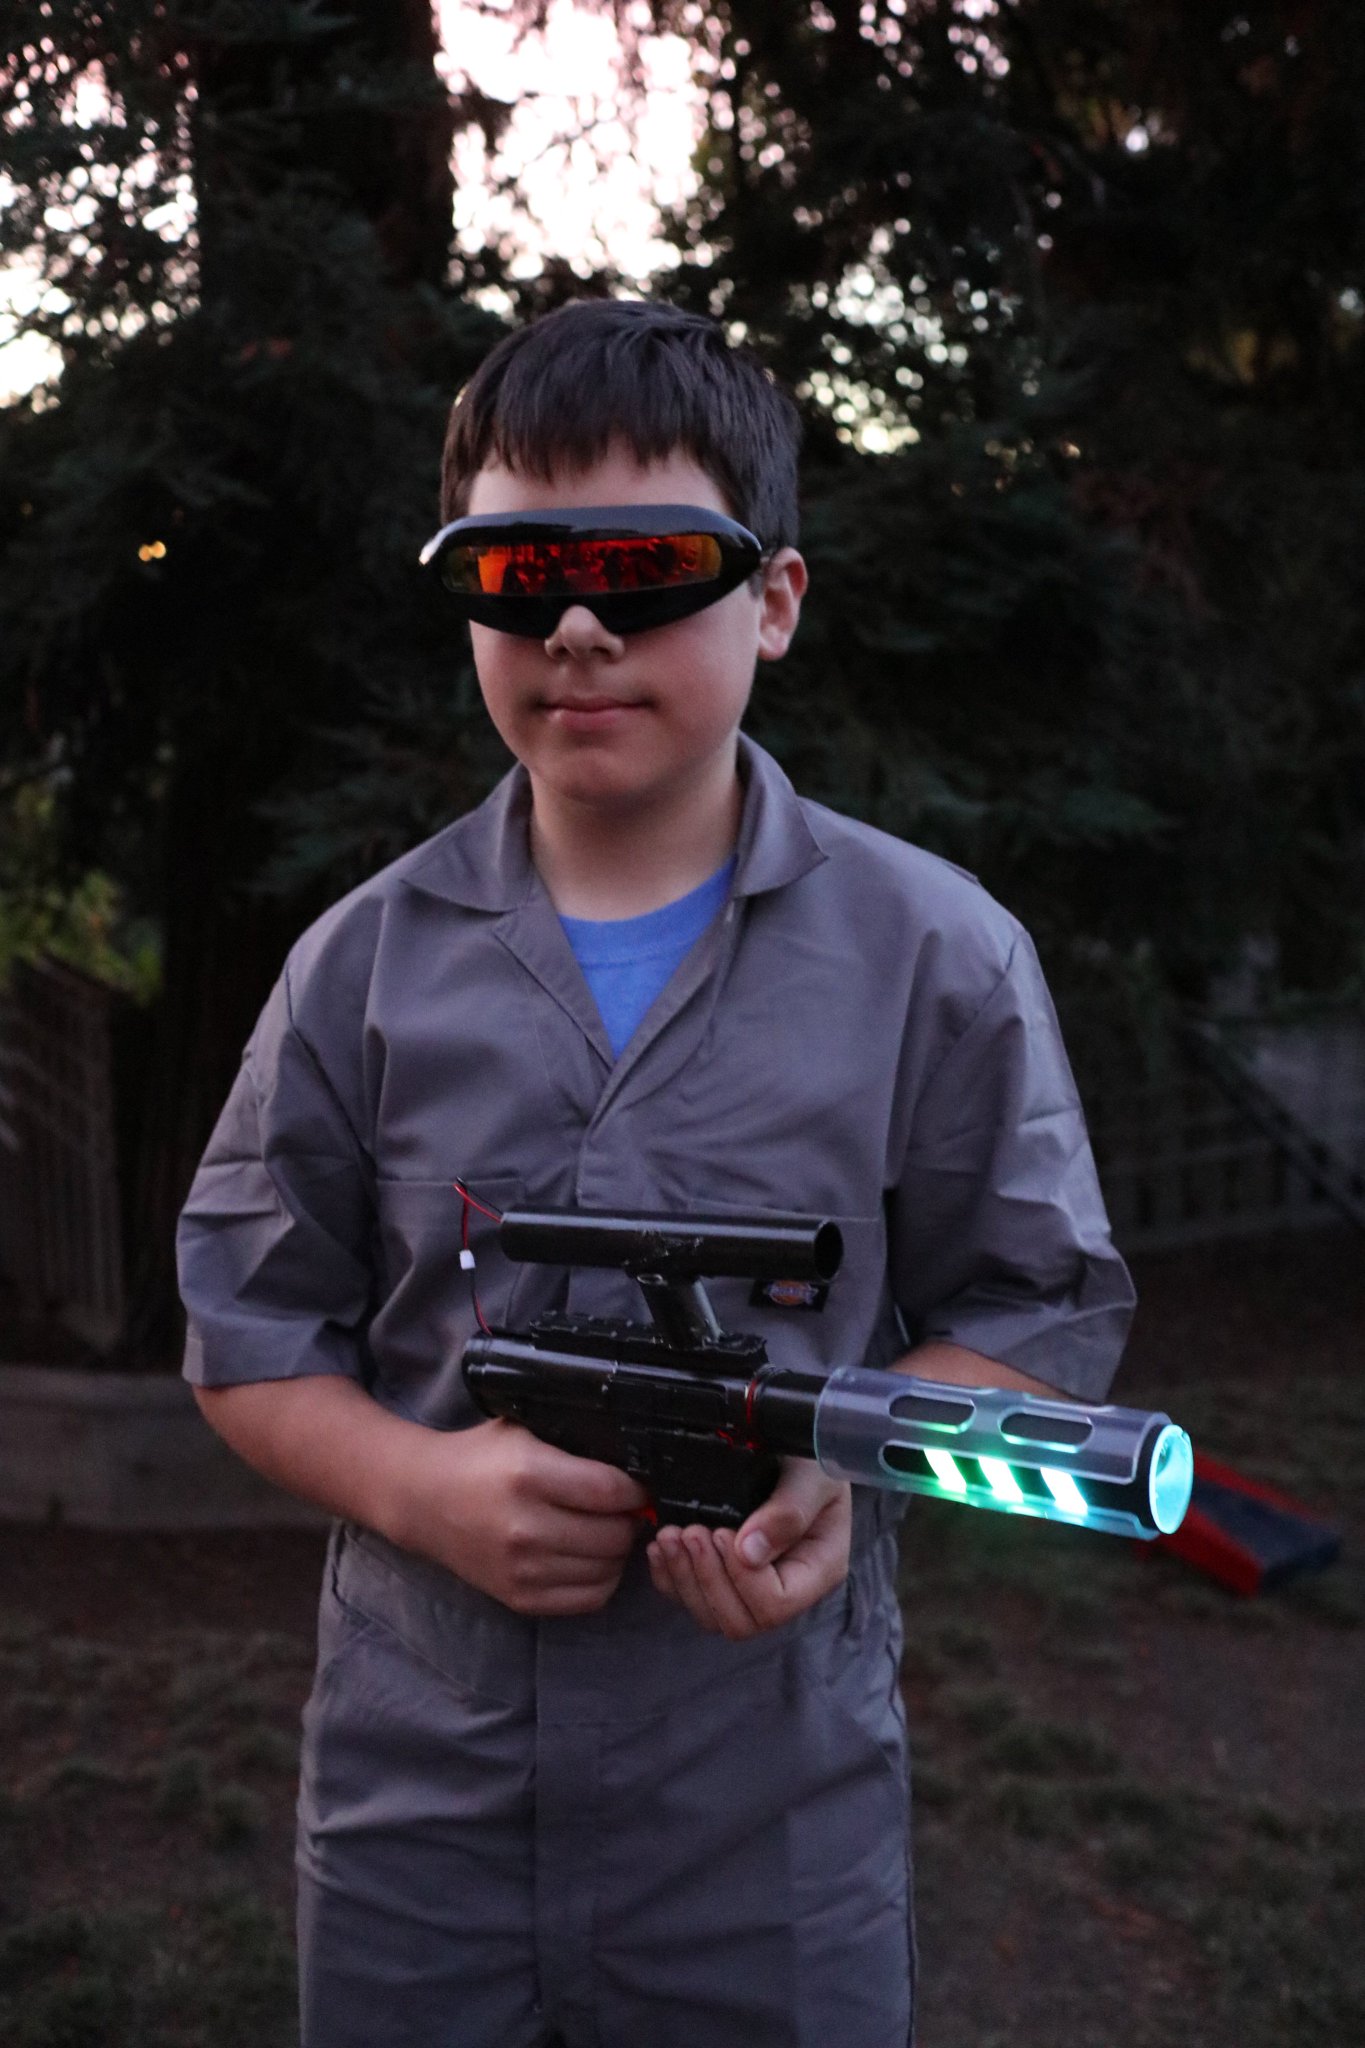 Eric Paulos On Twitter Halloween Recap So My Son Decided To Be A Character From Roblox Game Tower Battles Called The Phaser I Had No Idea What This Was Resulting Costume We Designed - roblox tower battles fan art